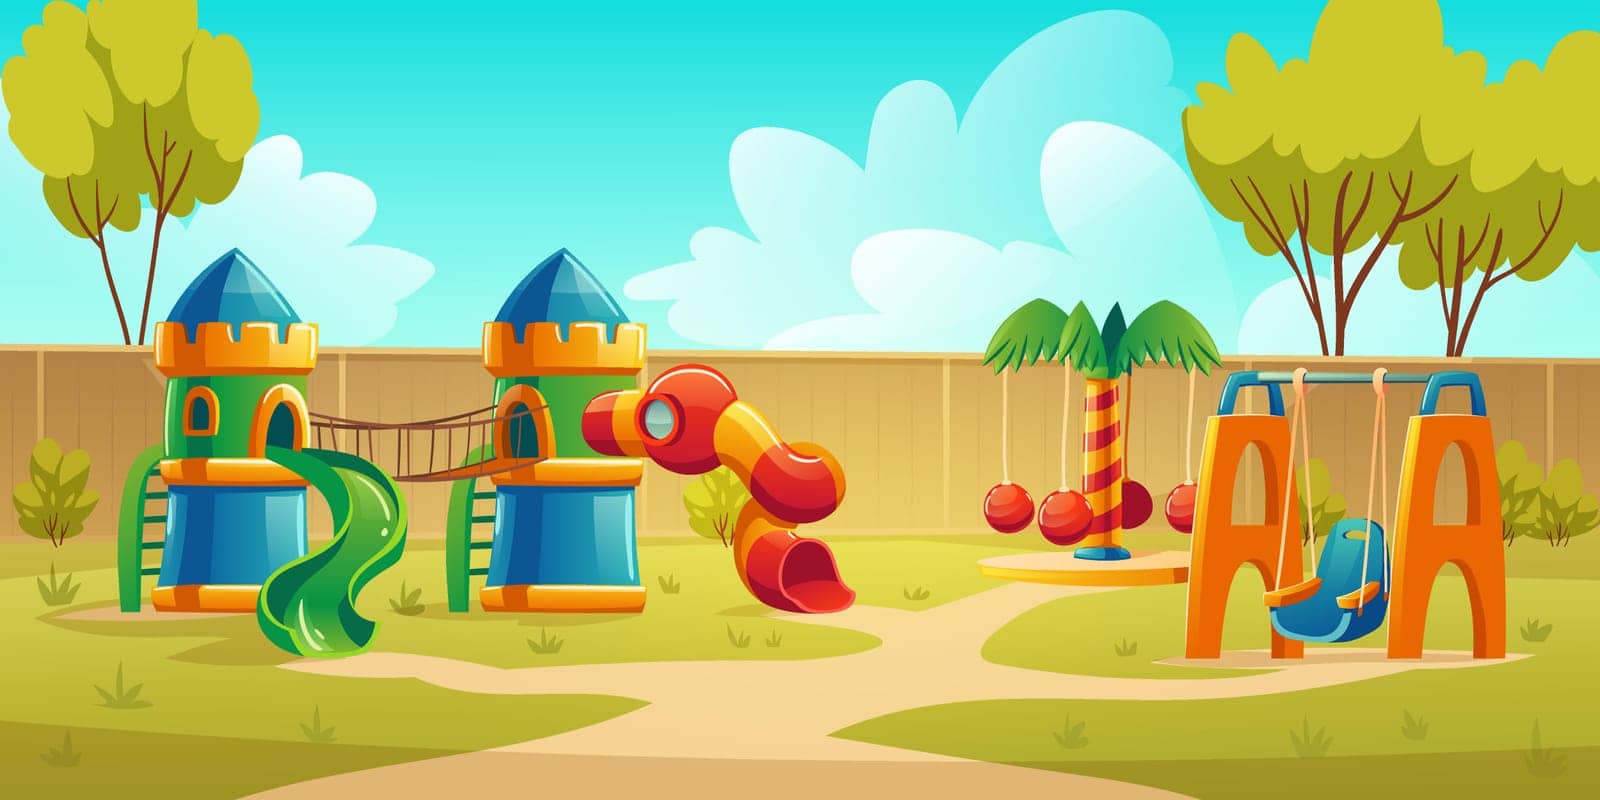 Kids playground in summer park, garden or backyard with carousel, spiral tube slide and swing. Vector cartoon illustration of kindergarten play ground, castle with slides on green lawn